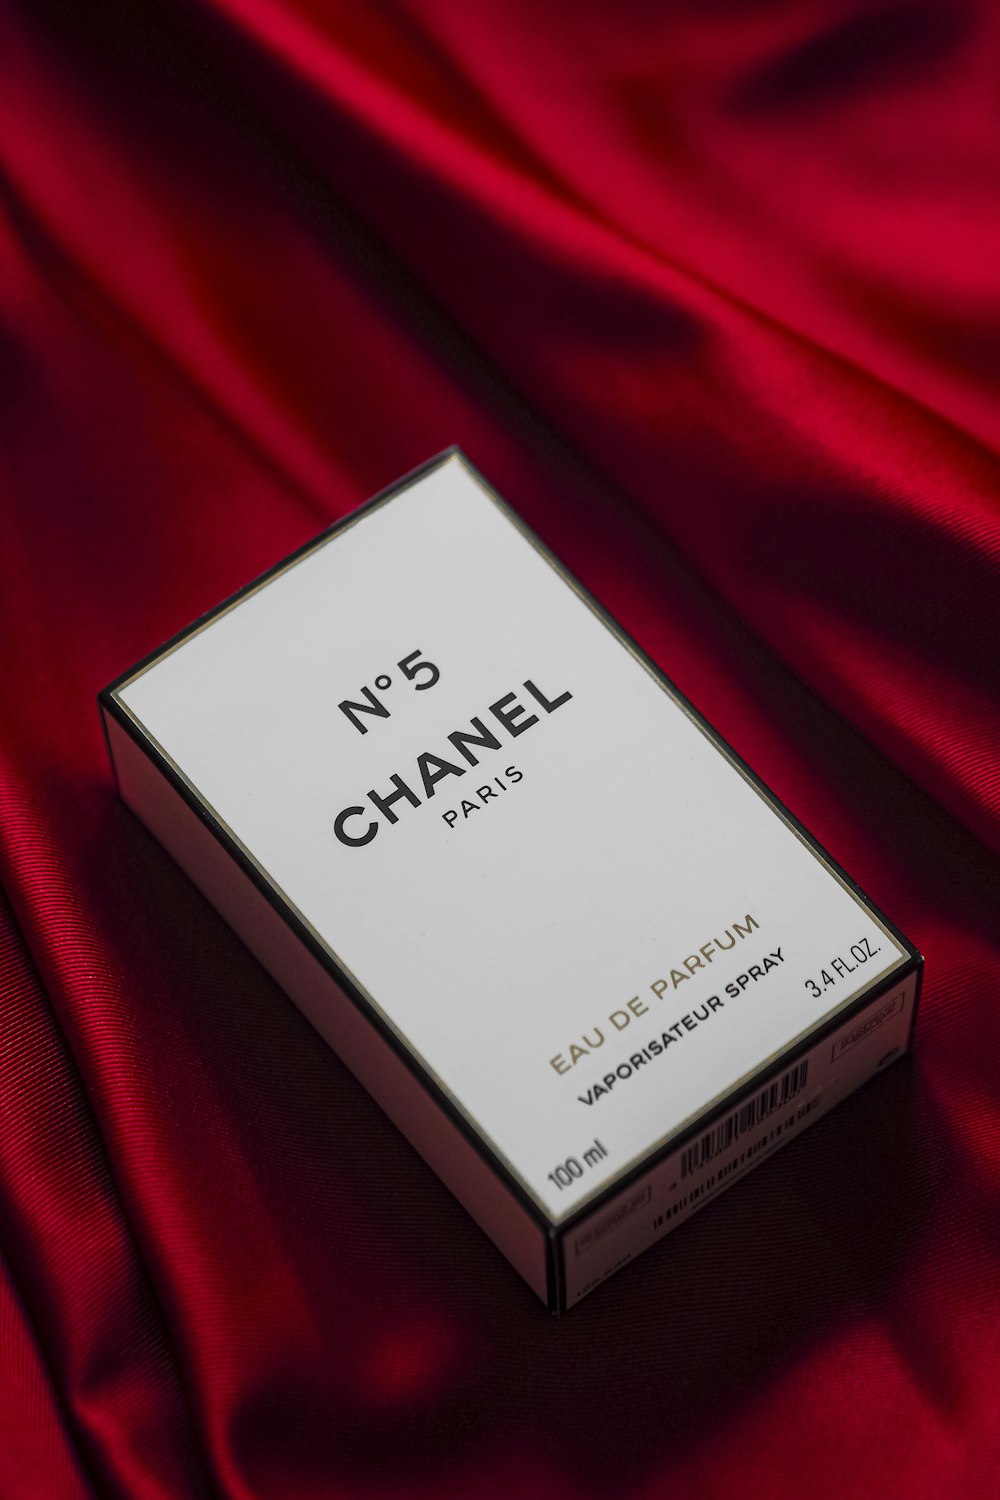 a box of chanel no 5 on a red cloth